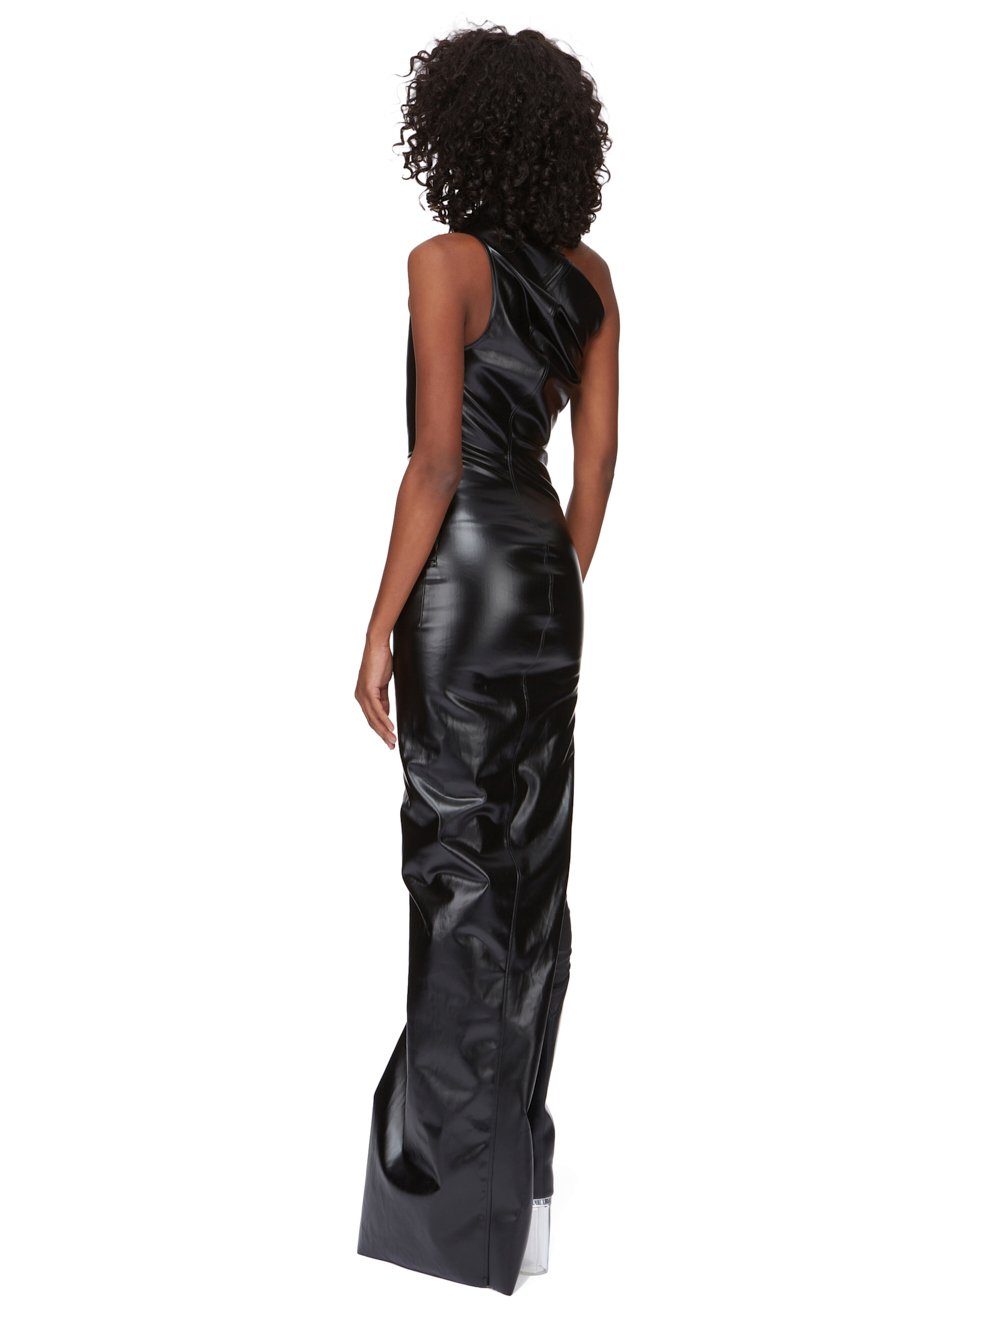 RICK OWENS FW23 LUXOR ATHENA GOWN IN BLACK RUBBER COVERED STRETCH DENIM